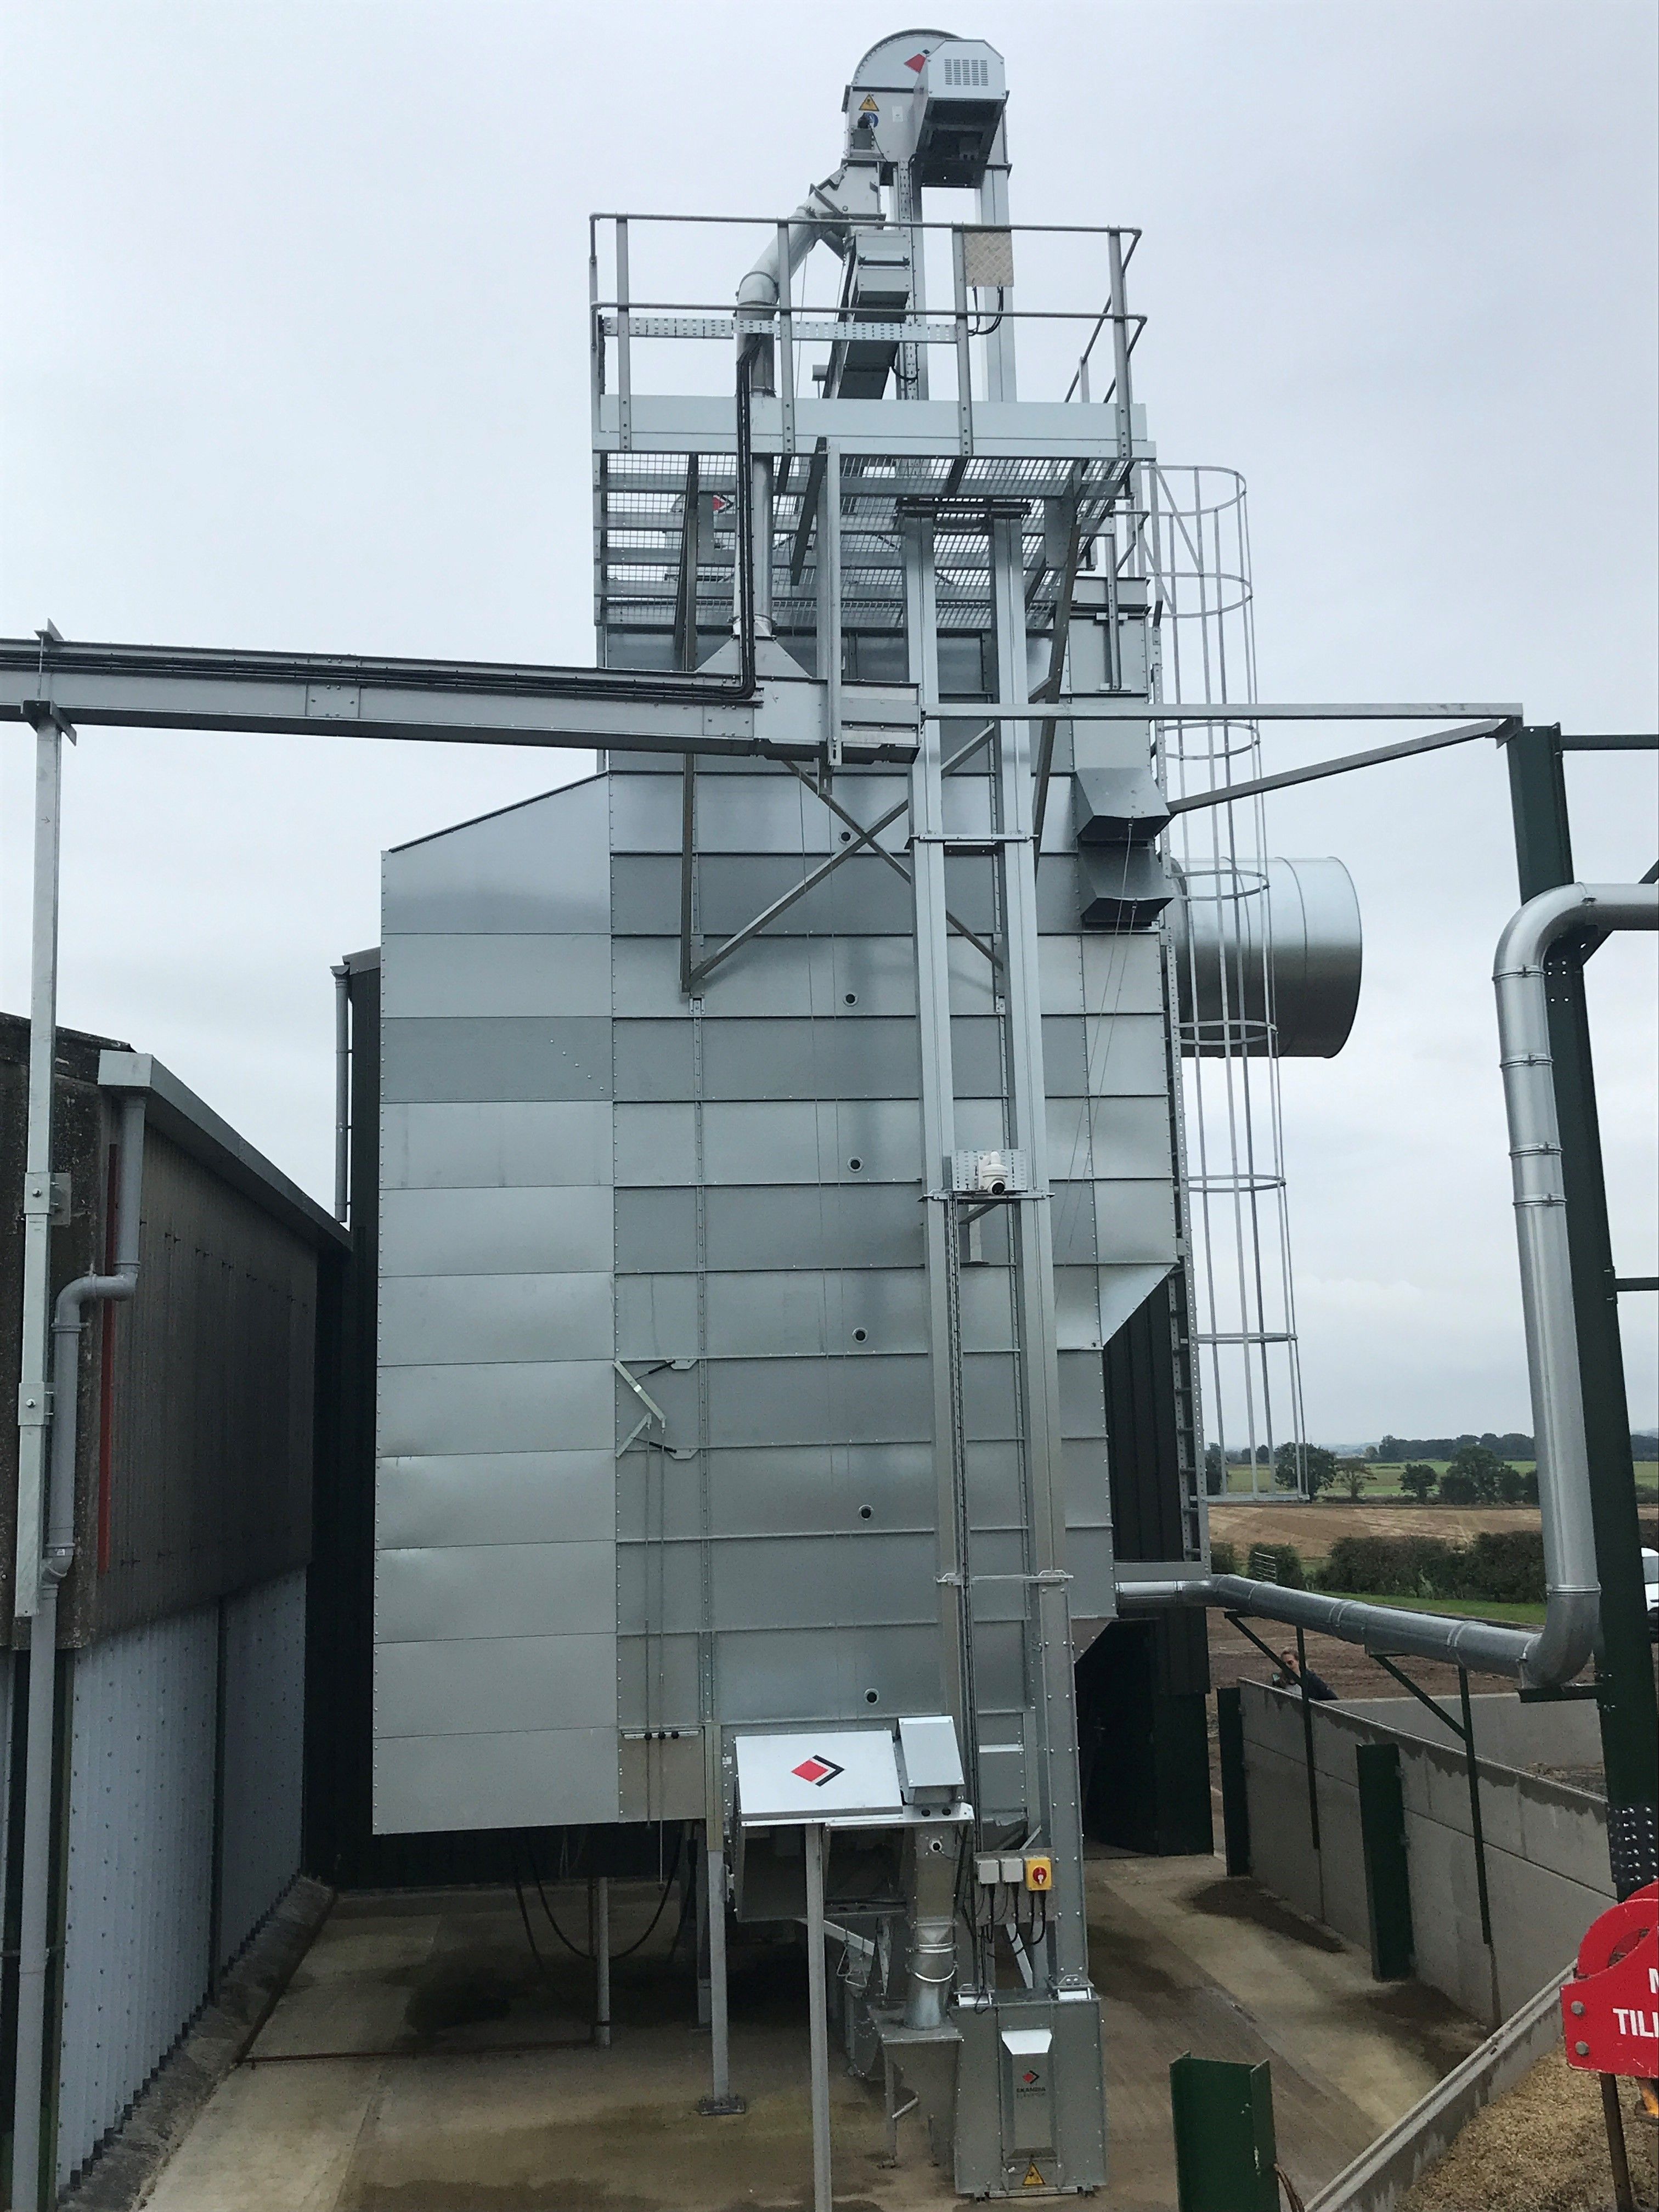 Succession plans and climate change drive Frickley Holdings Ltd to bring grain drying and processing plant into the 21st century with solution from BDC Systems Ltd and McArthur Agriculture